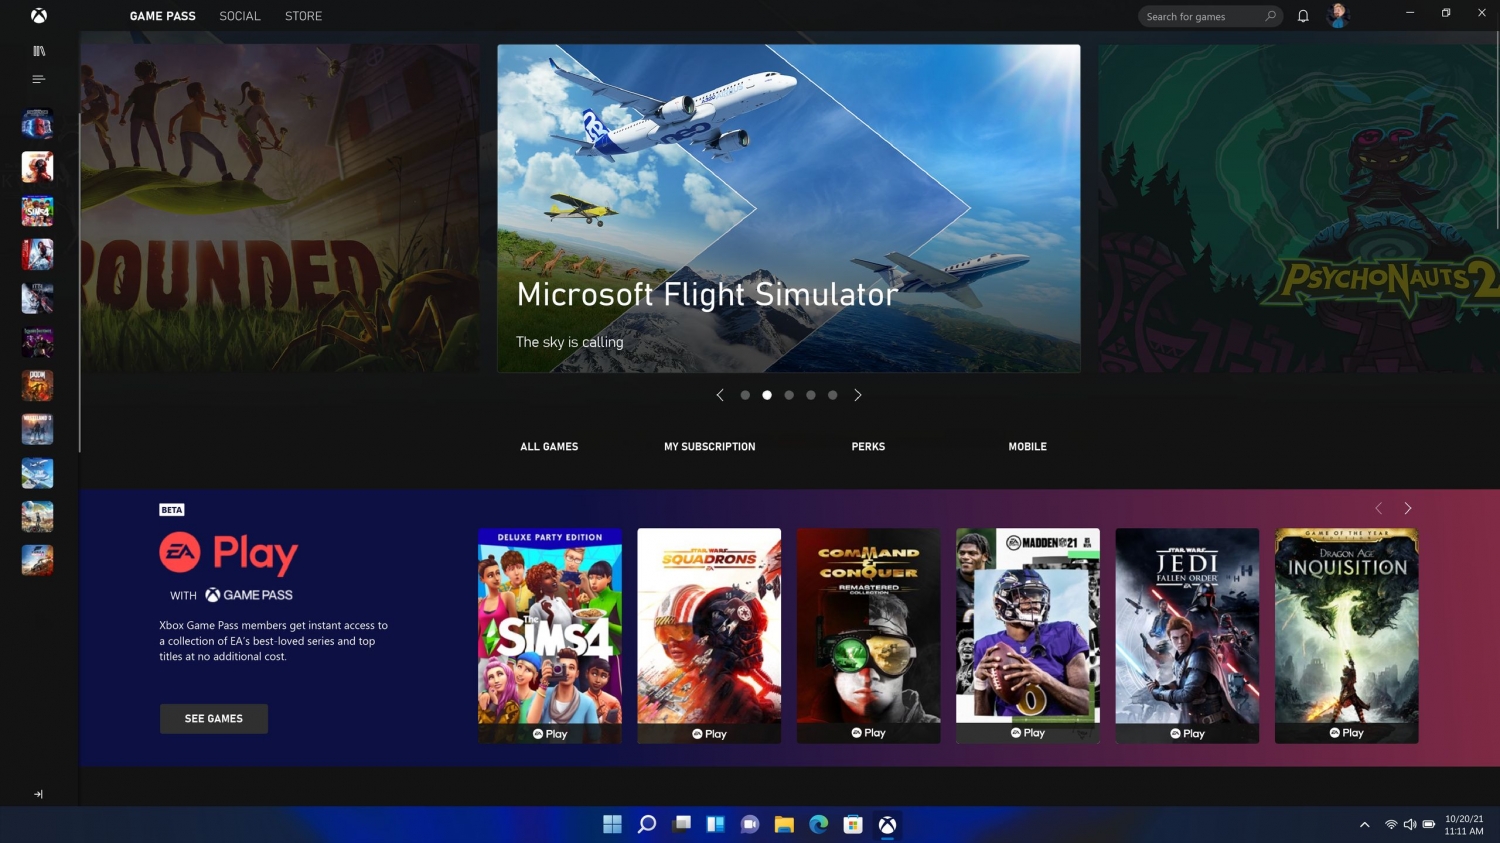 Windows 11  The Best Windows Ever for Gaming 